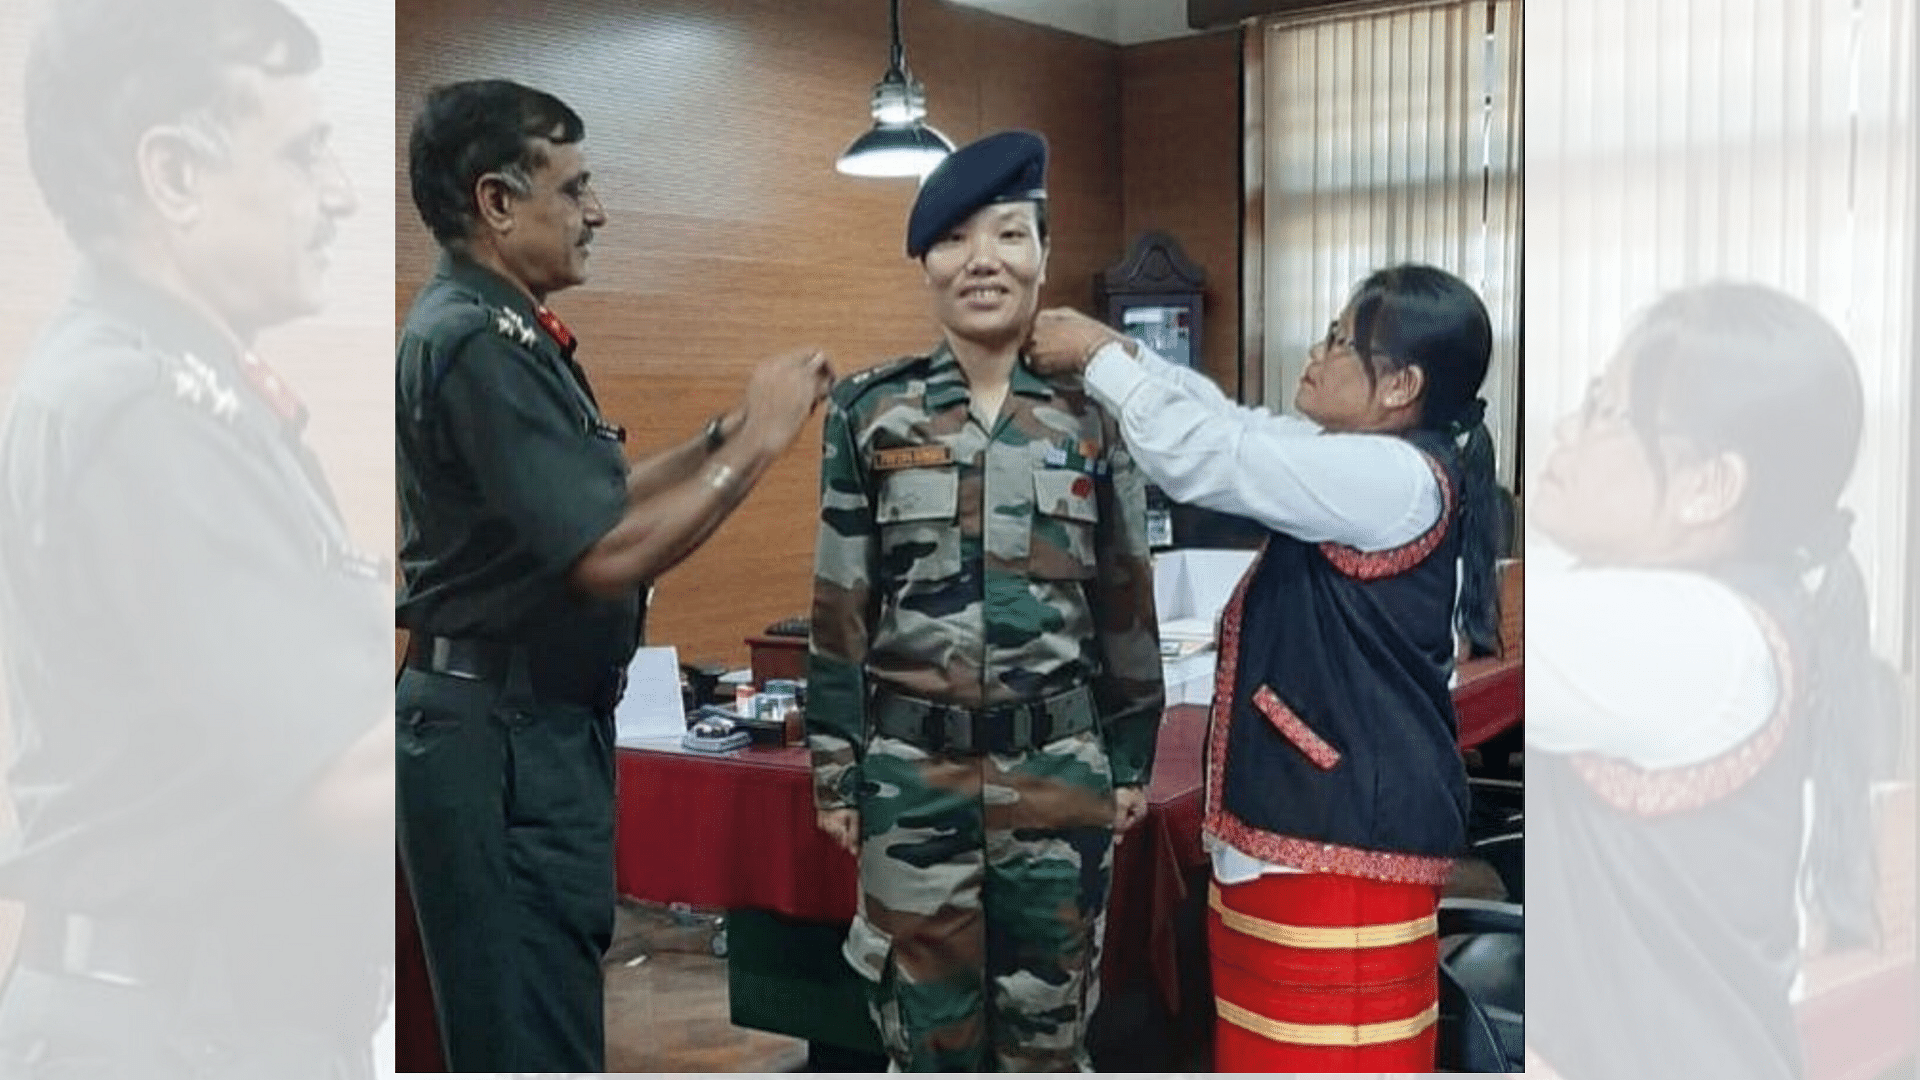 Ponung Doming was elevated from the post of Army Major on Monday, 23 September.